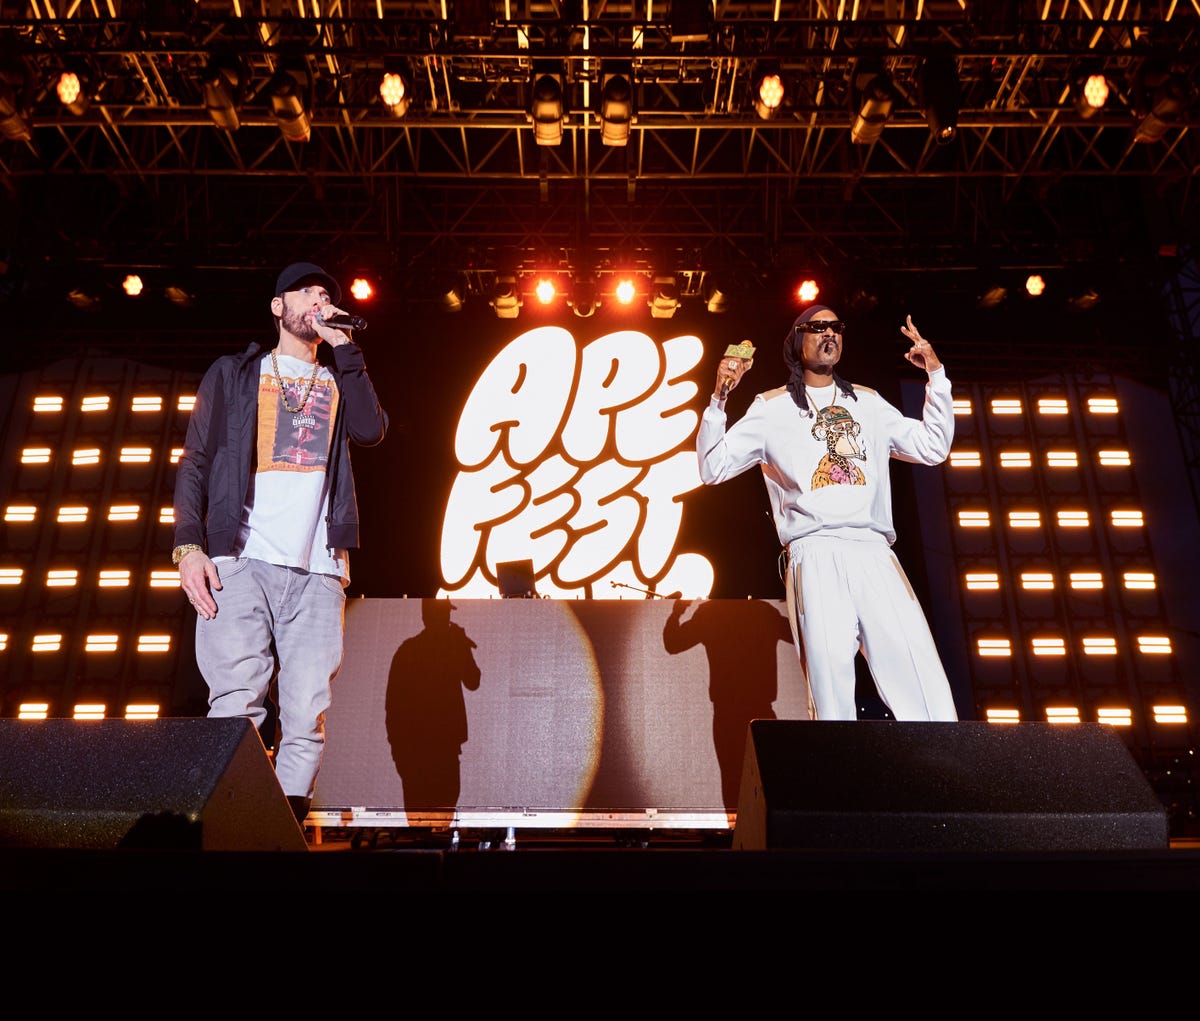 Eminem and Snoop Dogg performing at Ape Fest 2022.